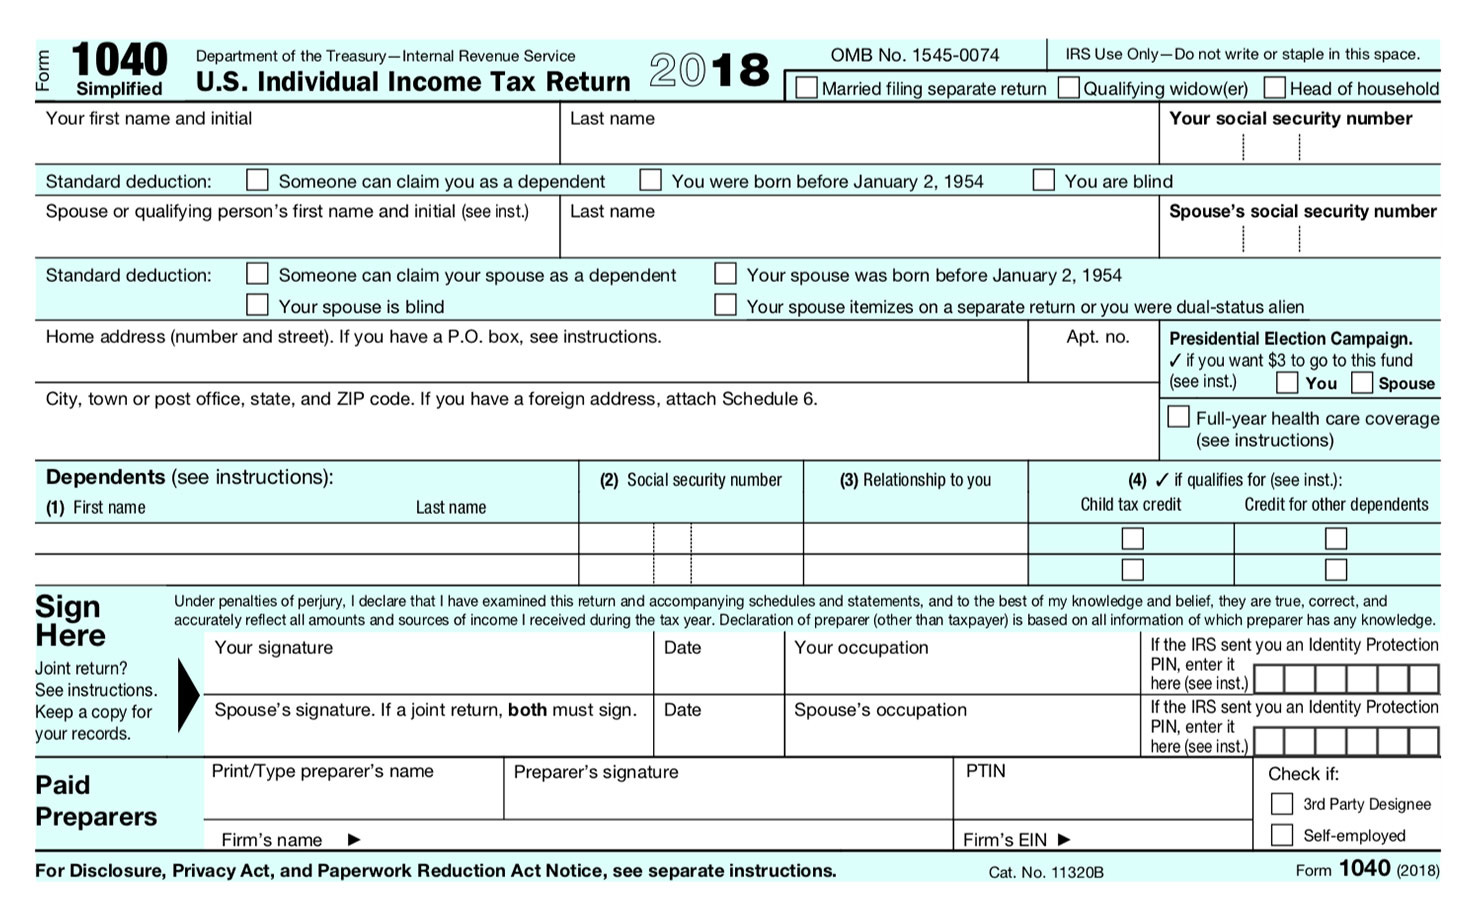 irs tax forms